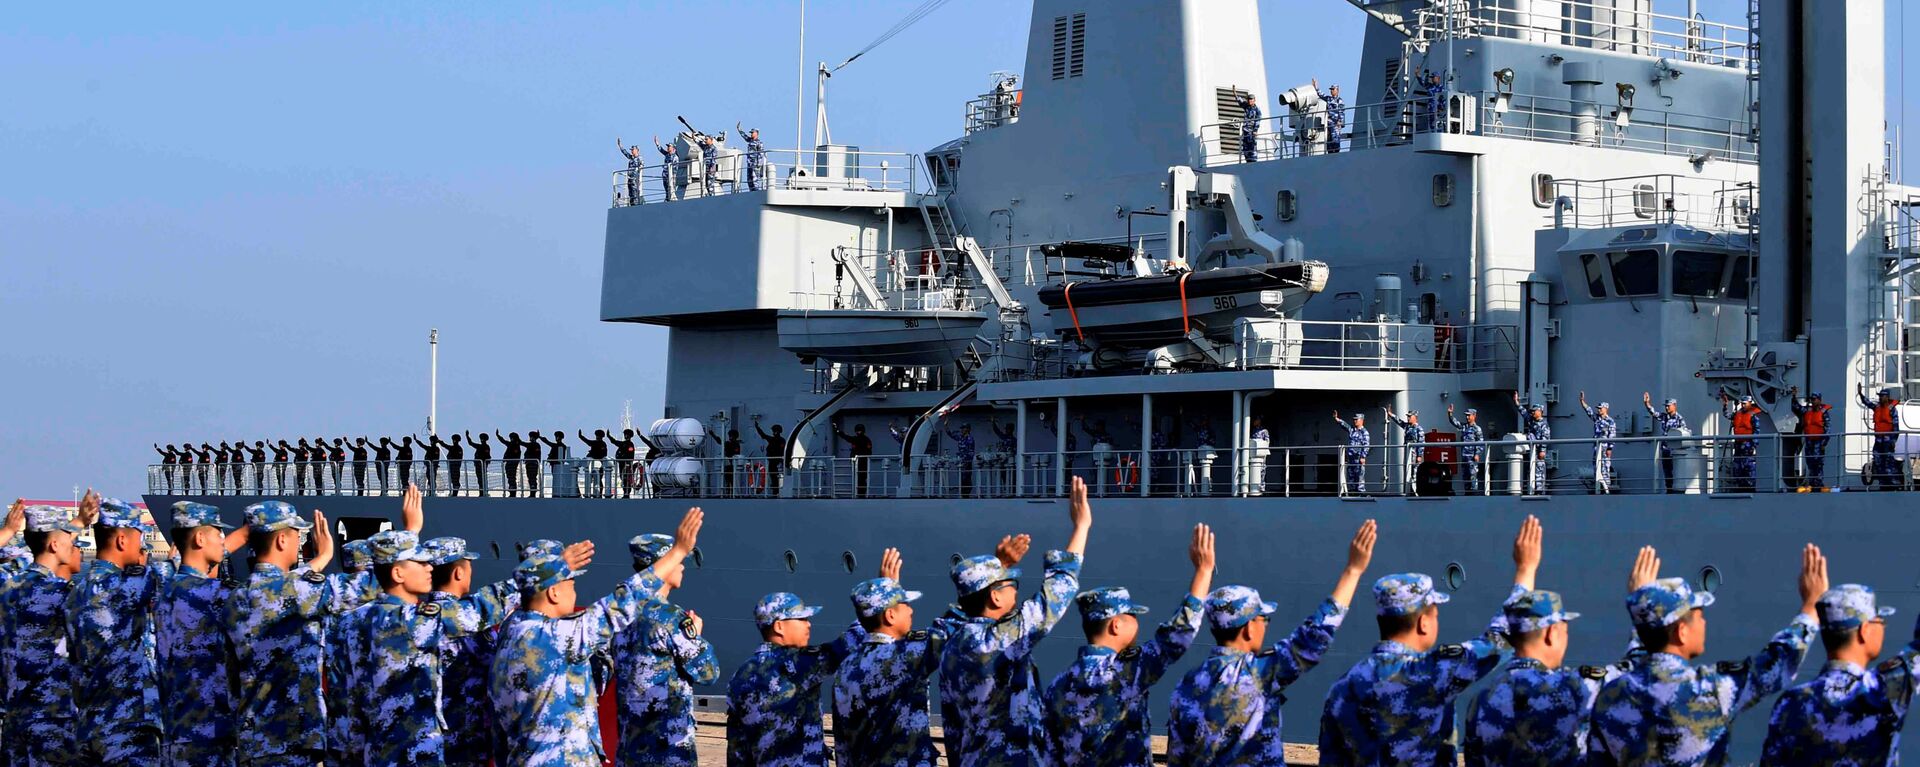 Soldiers of the Chinese People's Liberation Army (PLA) Navy take part in a ceremony as a replenishment ship sets sail to the Gulf of Aden and the waters off Somalia, from a naval port in Qingdao, Shandong province, China September 3, 2020 - Sputnik International, 1920, 03.08.2022